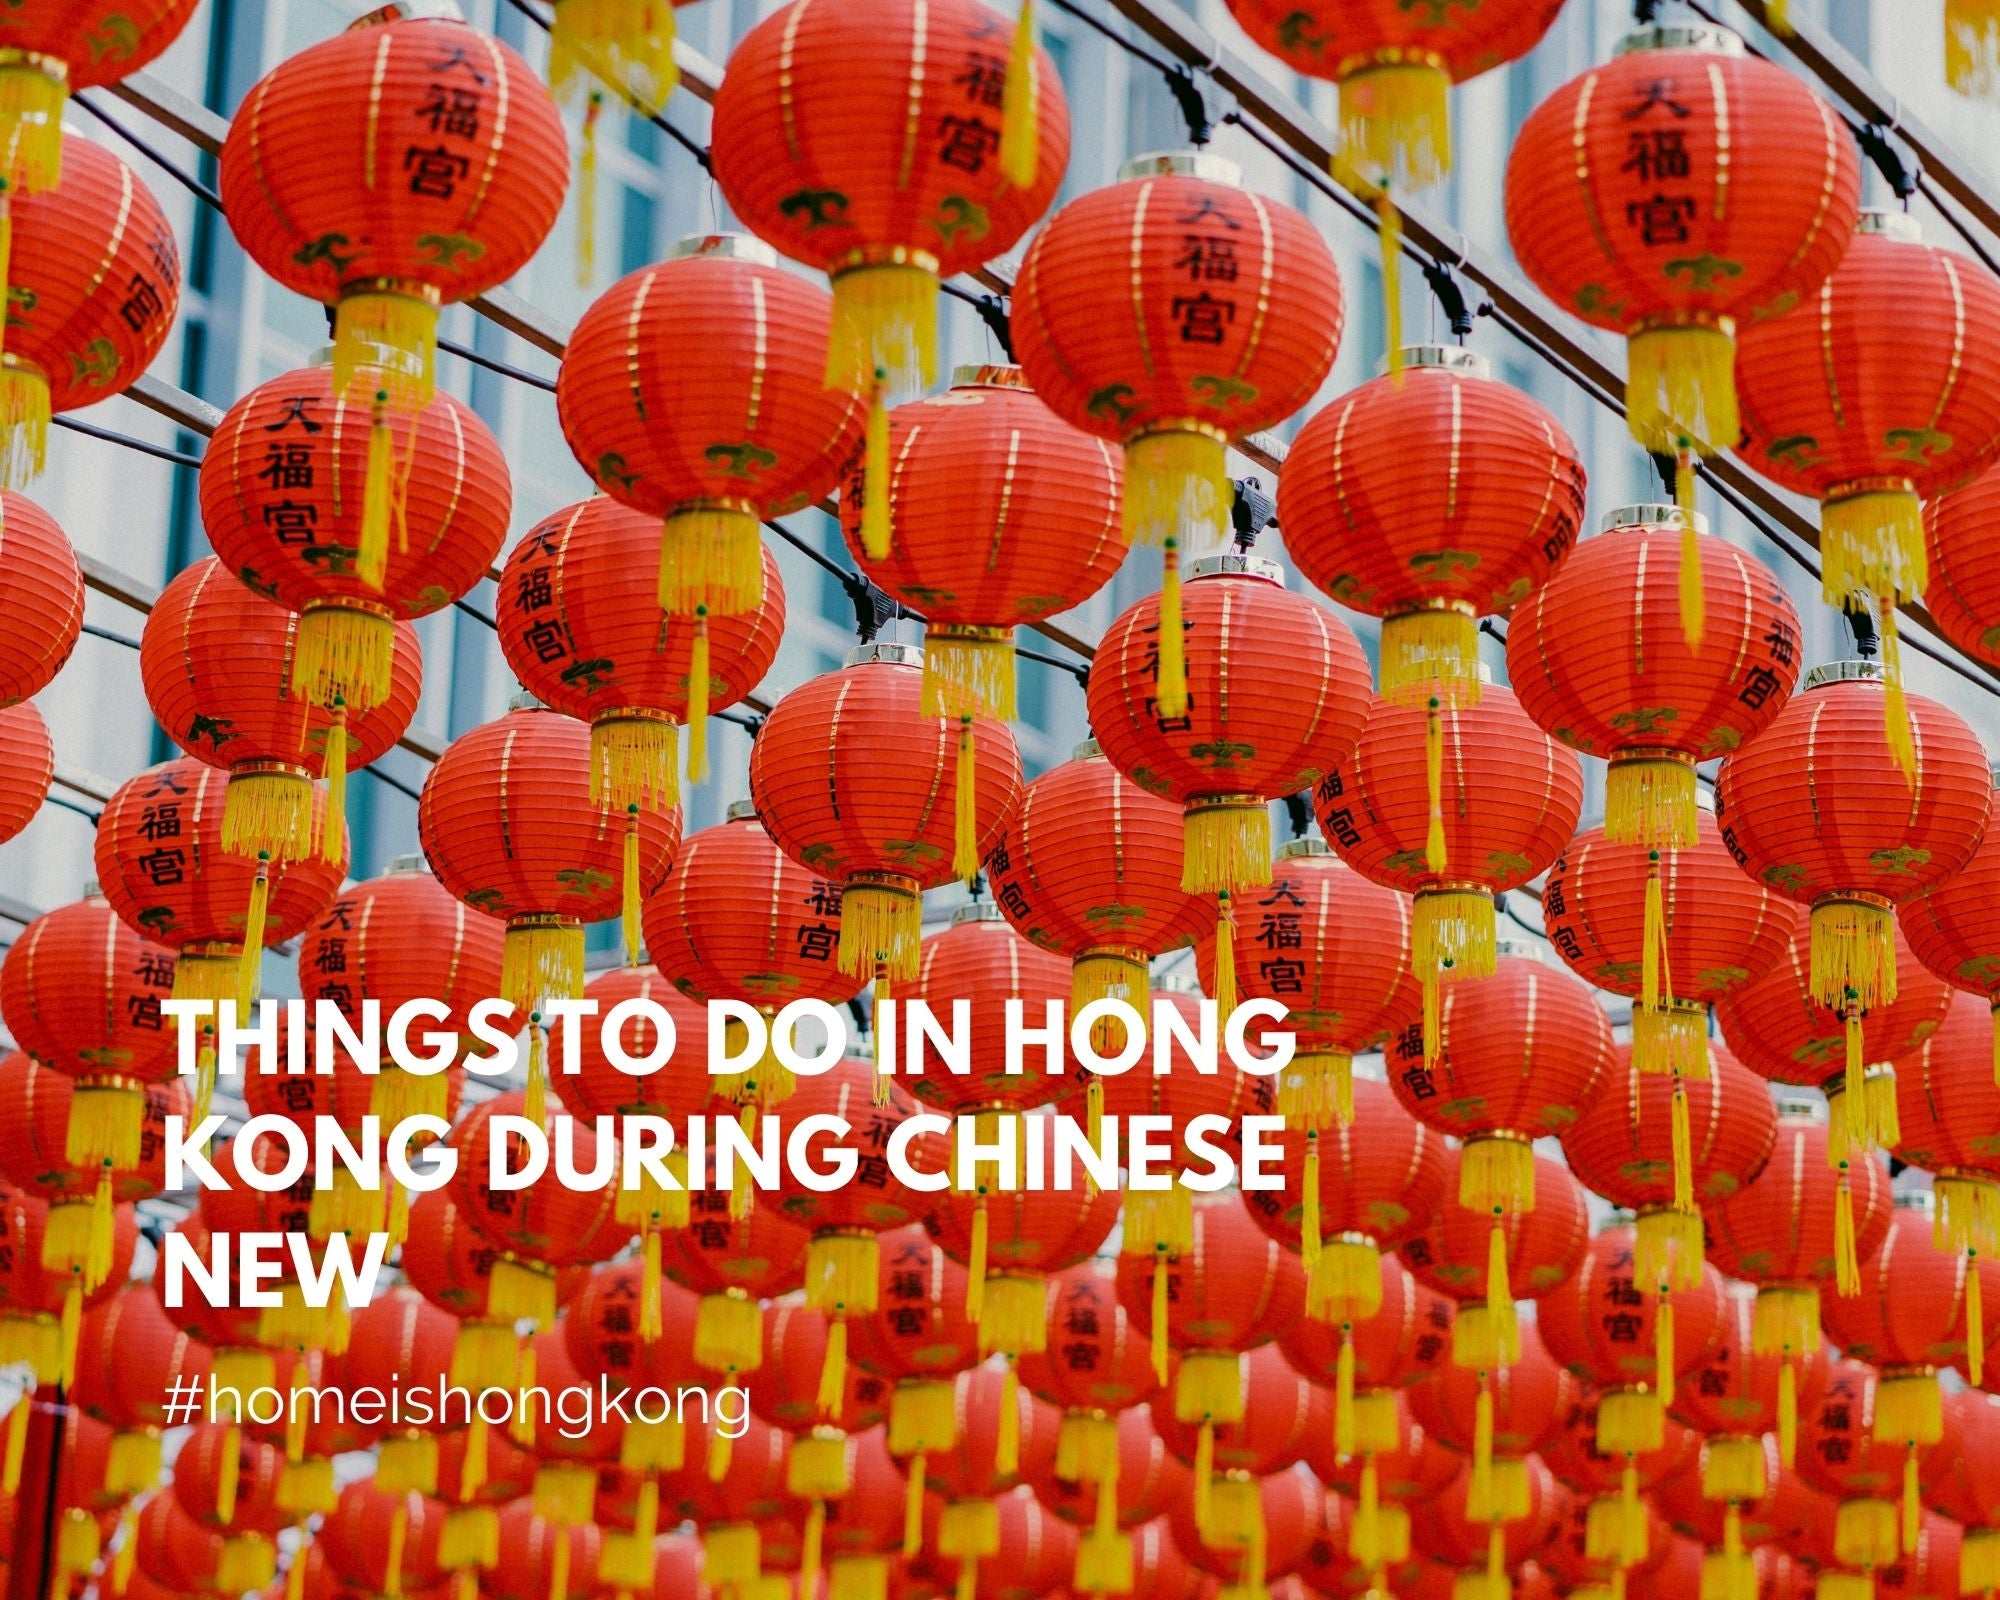 Things to do in Hong Kong during Chinese New Year